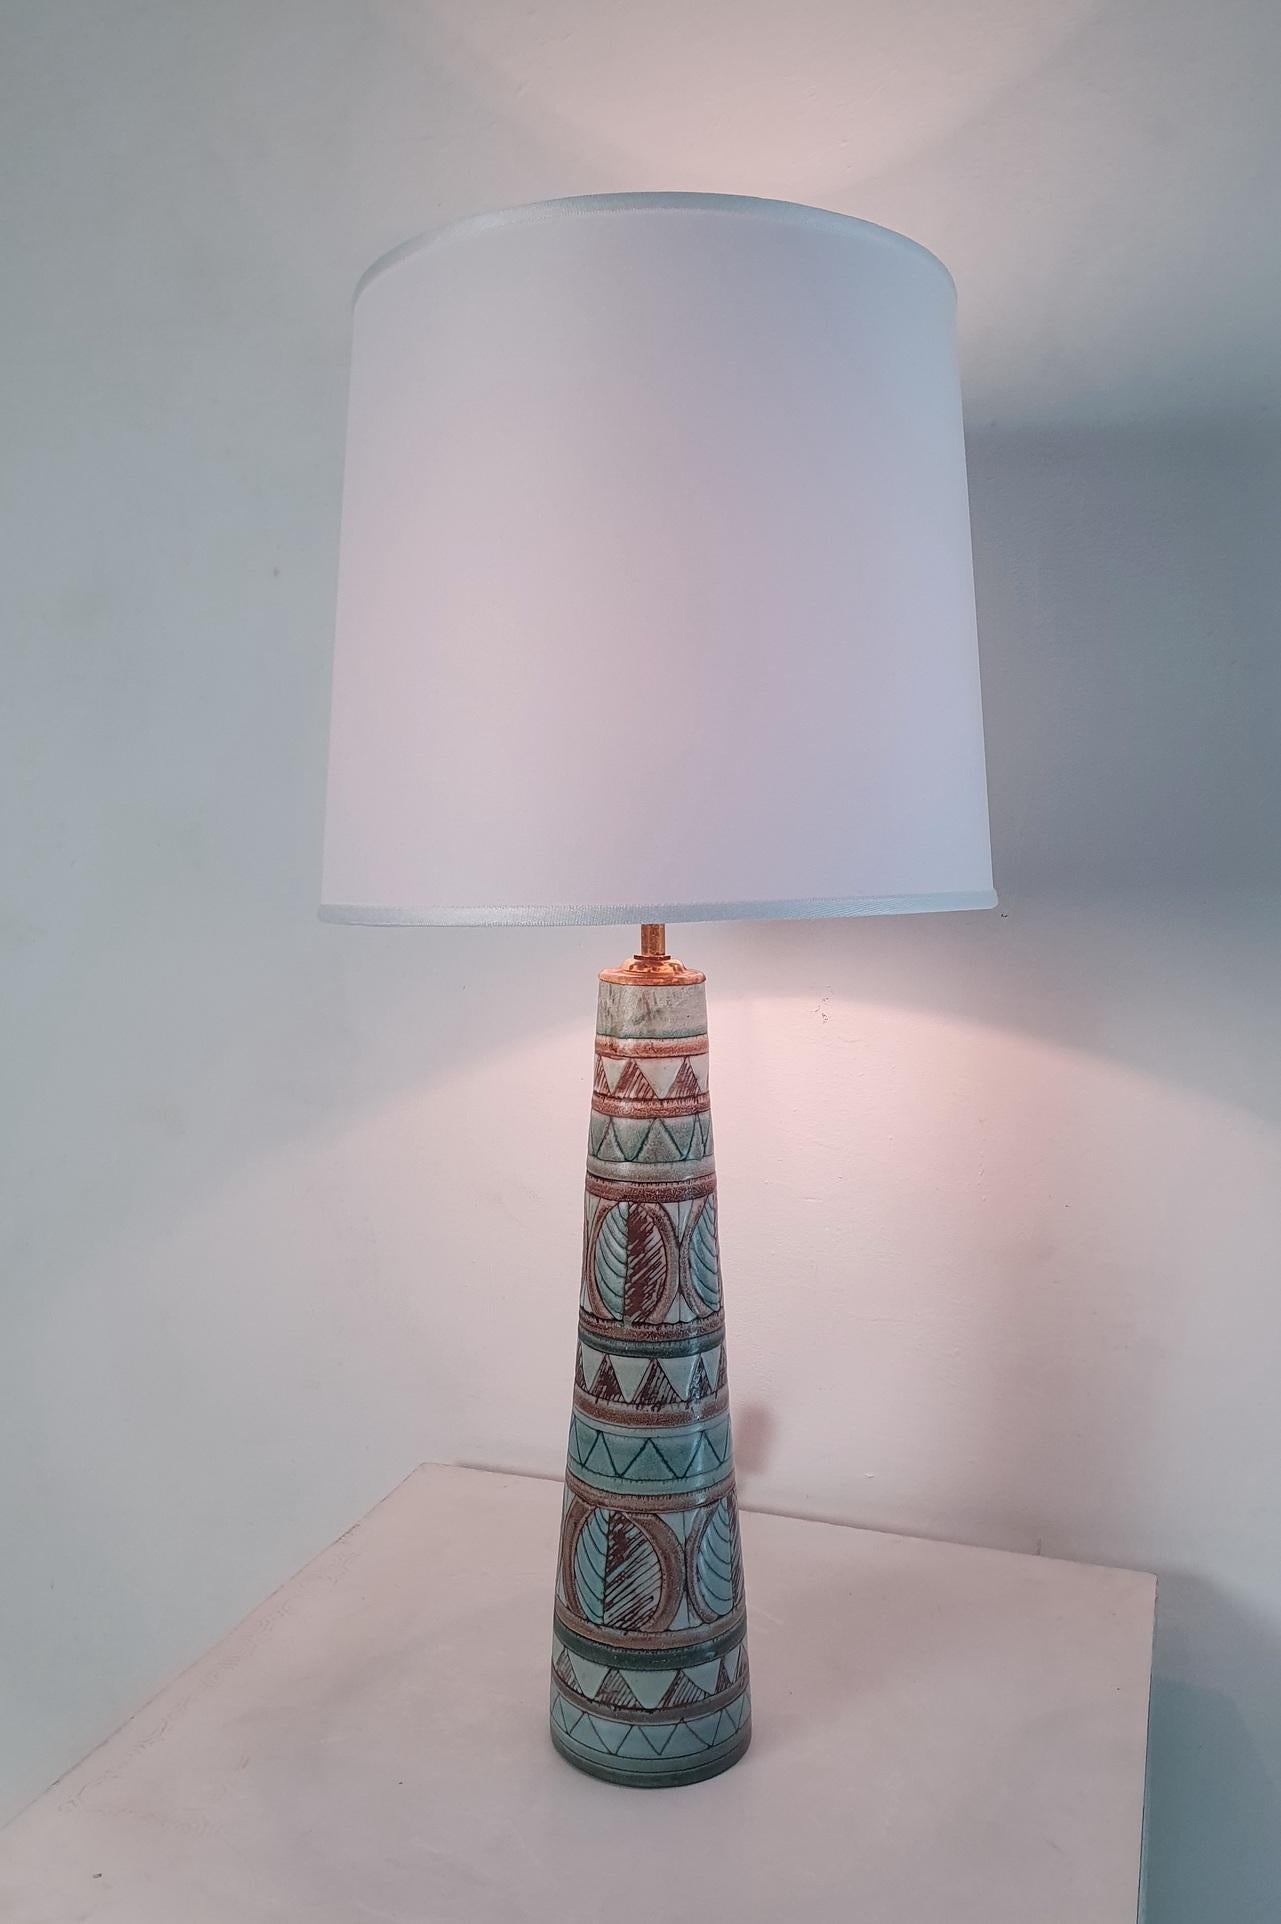 Rare ceramic lamp by Irma Yourstone, Sweden. Decorated with a simplistic design in pastel colors. Comes with a white brand new lamp shade. Marked underneath. Works with E40 light bulbs.